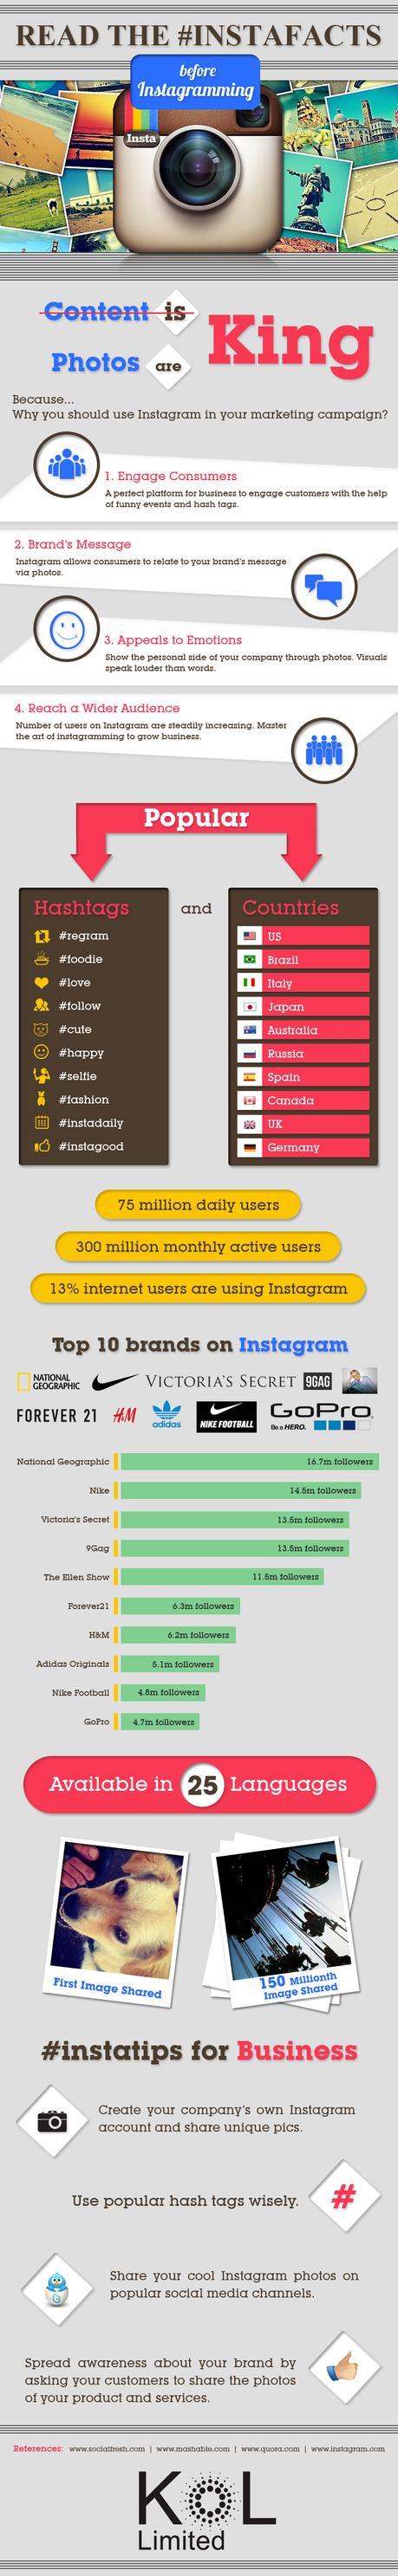 Instagram, the Facts [infographic]